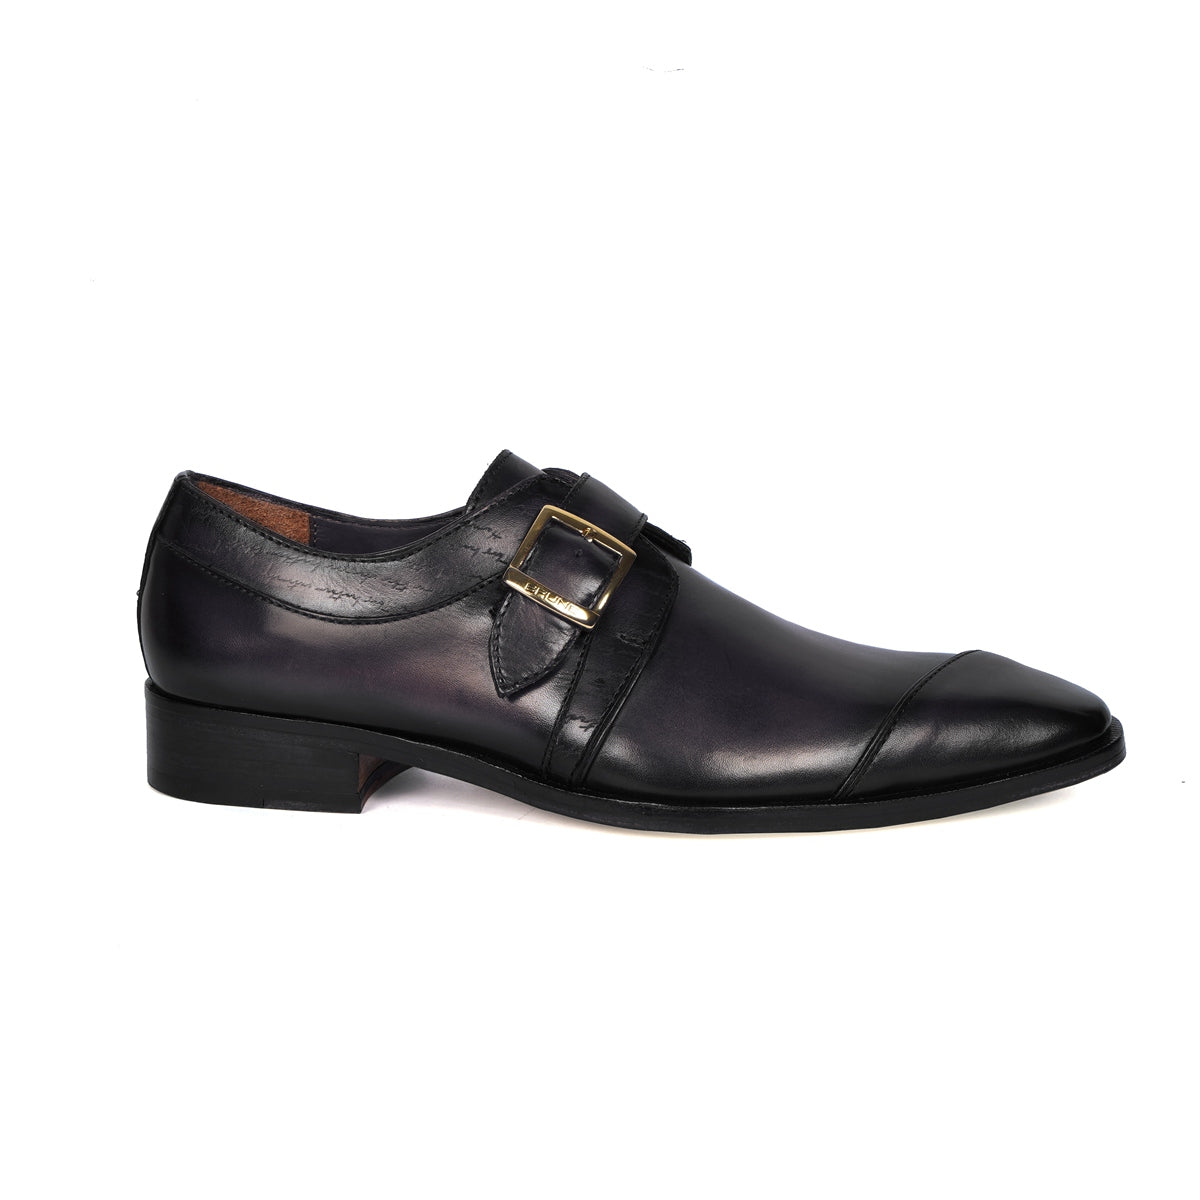 Voganow | Monk Strap Shoes - Buy Leather shoes for men